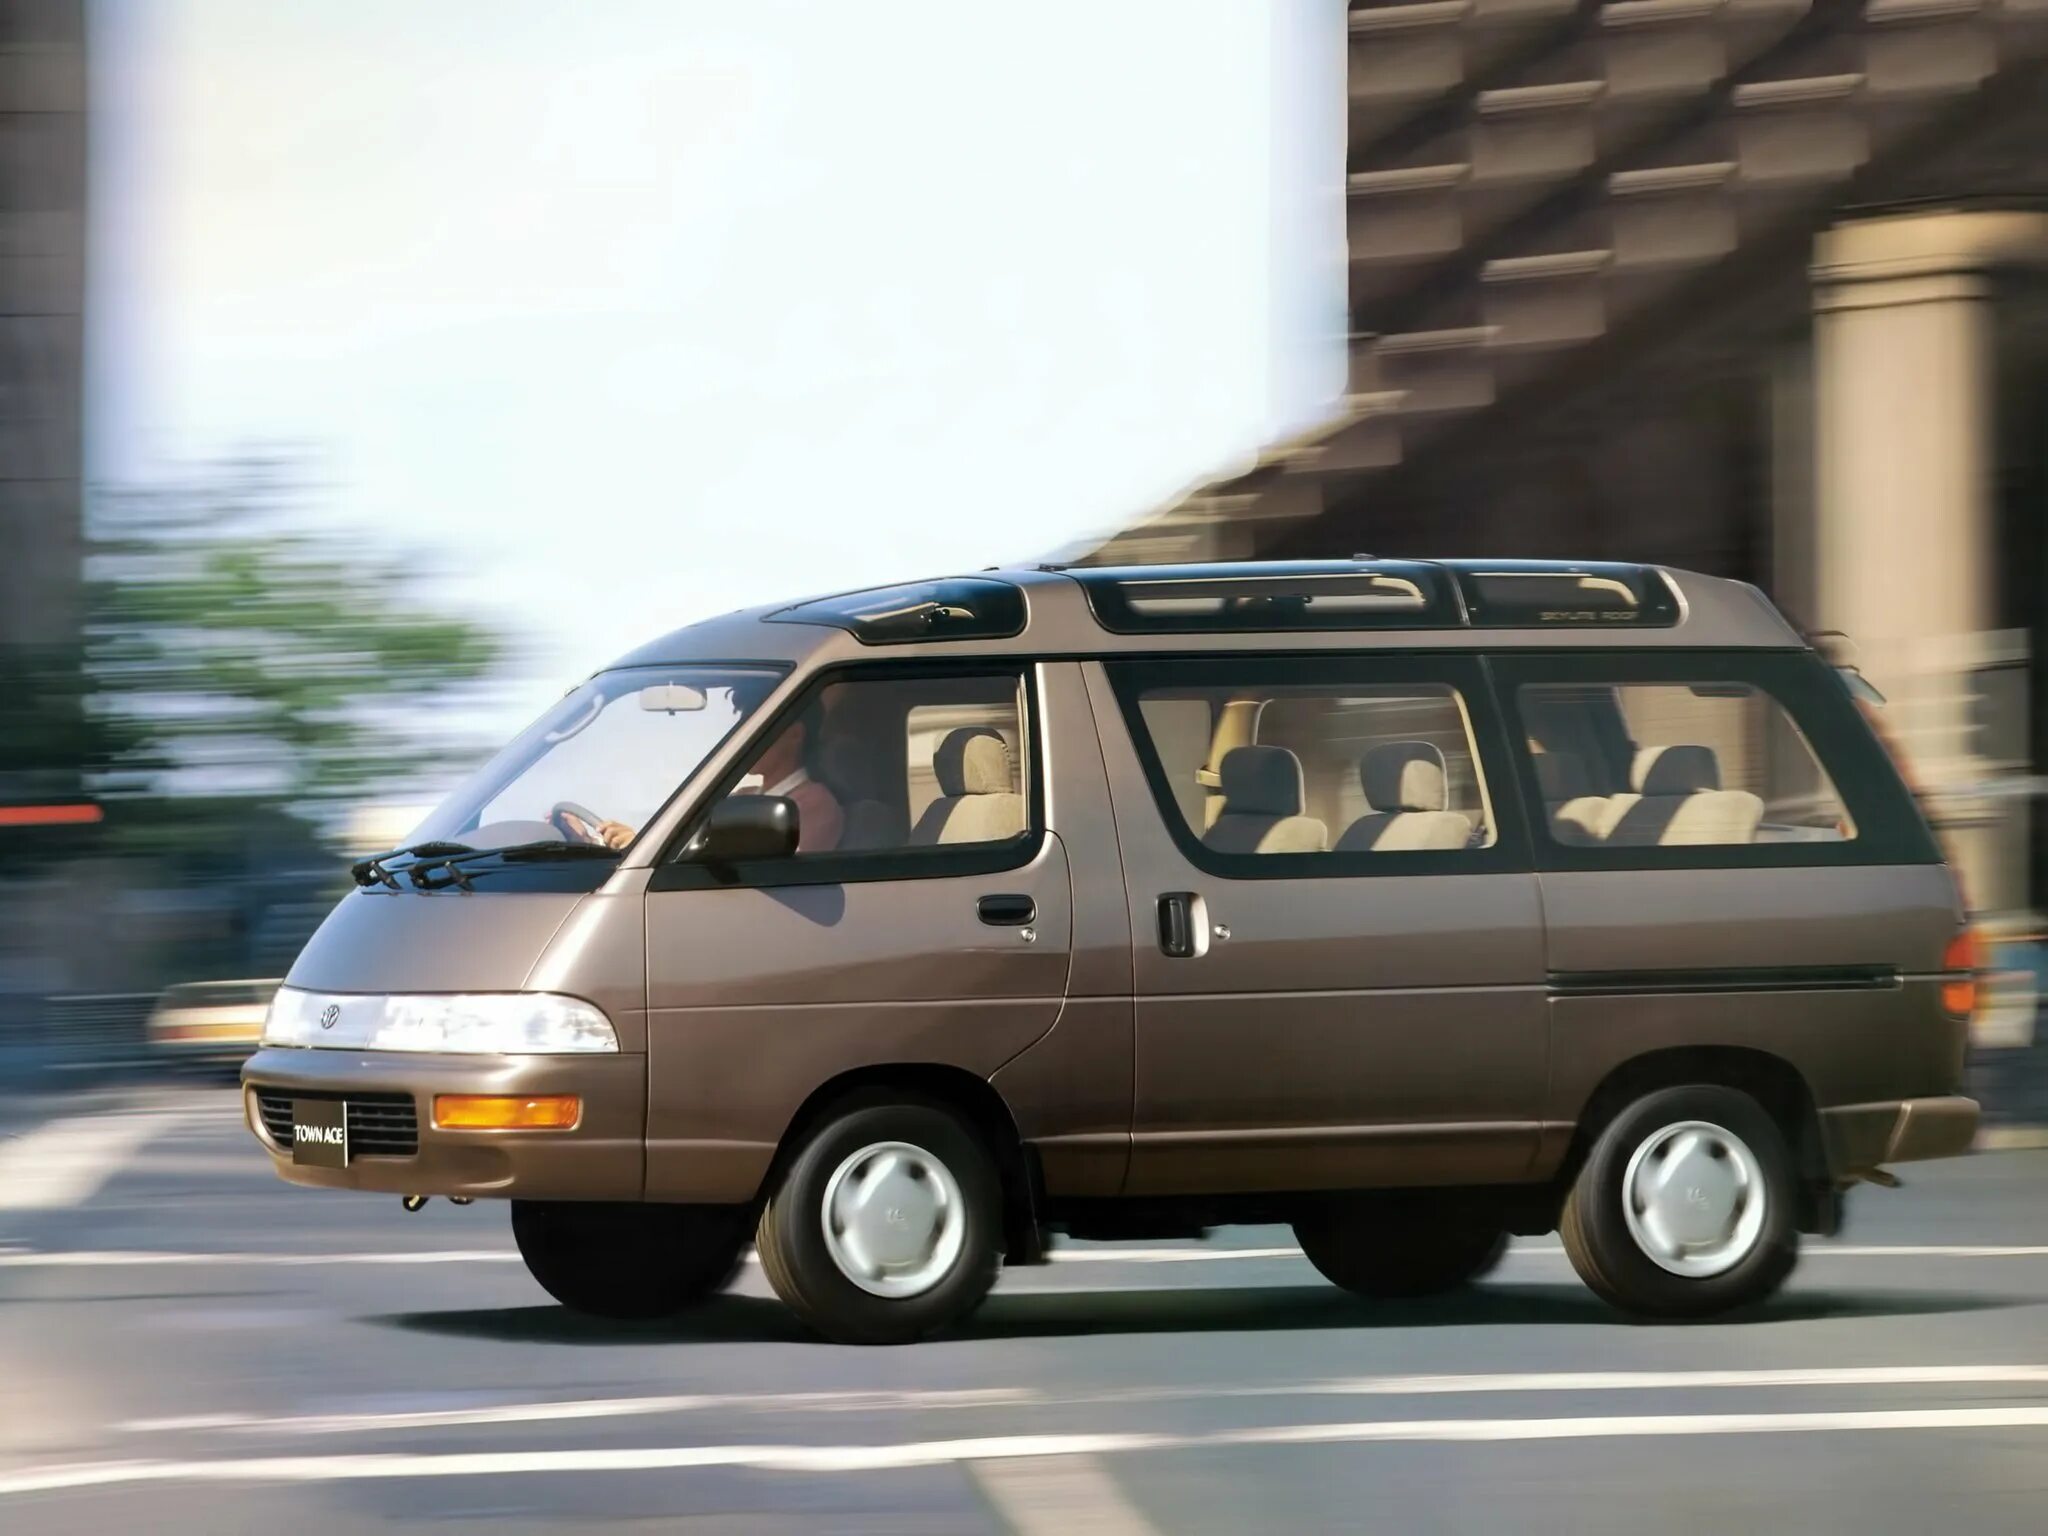 Toyota Town Ace. Тойота Town Ace 1996. Toyota Town Ace 1992-1996. Тойота Таун айс 1994. Таун аис